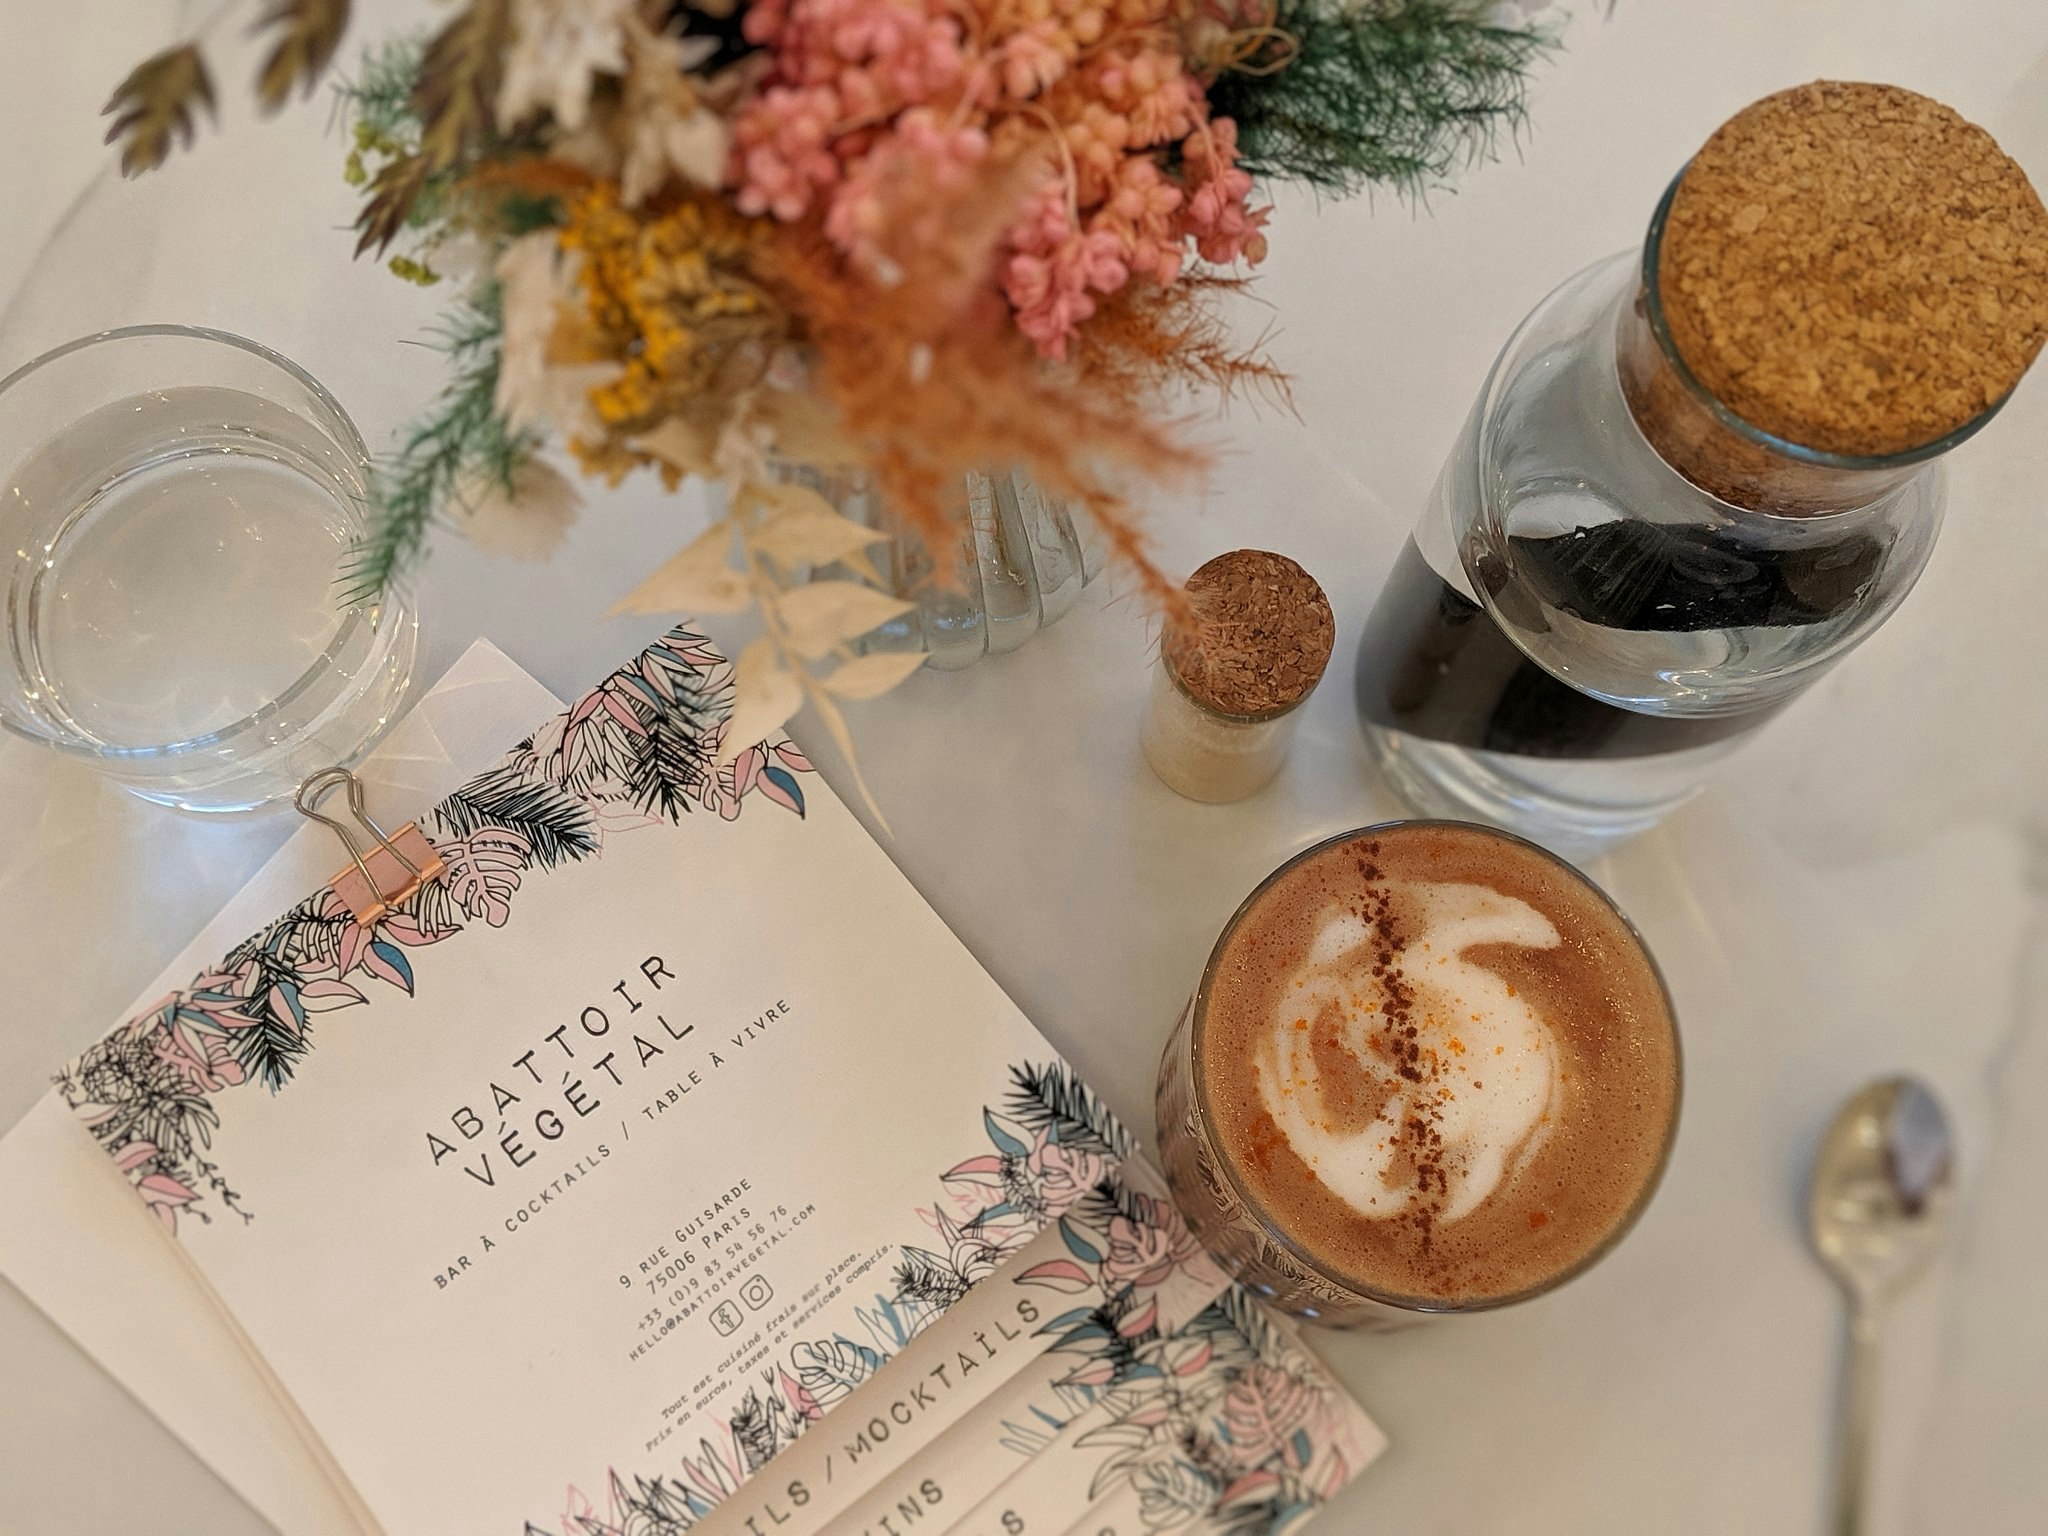 A latte on a white tablecloth next to corked water bottles, a floral display and a menu with a floral design.